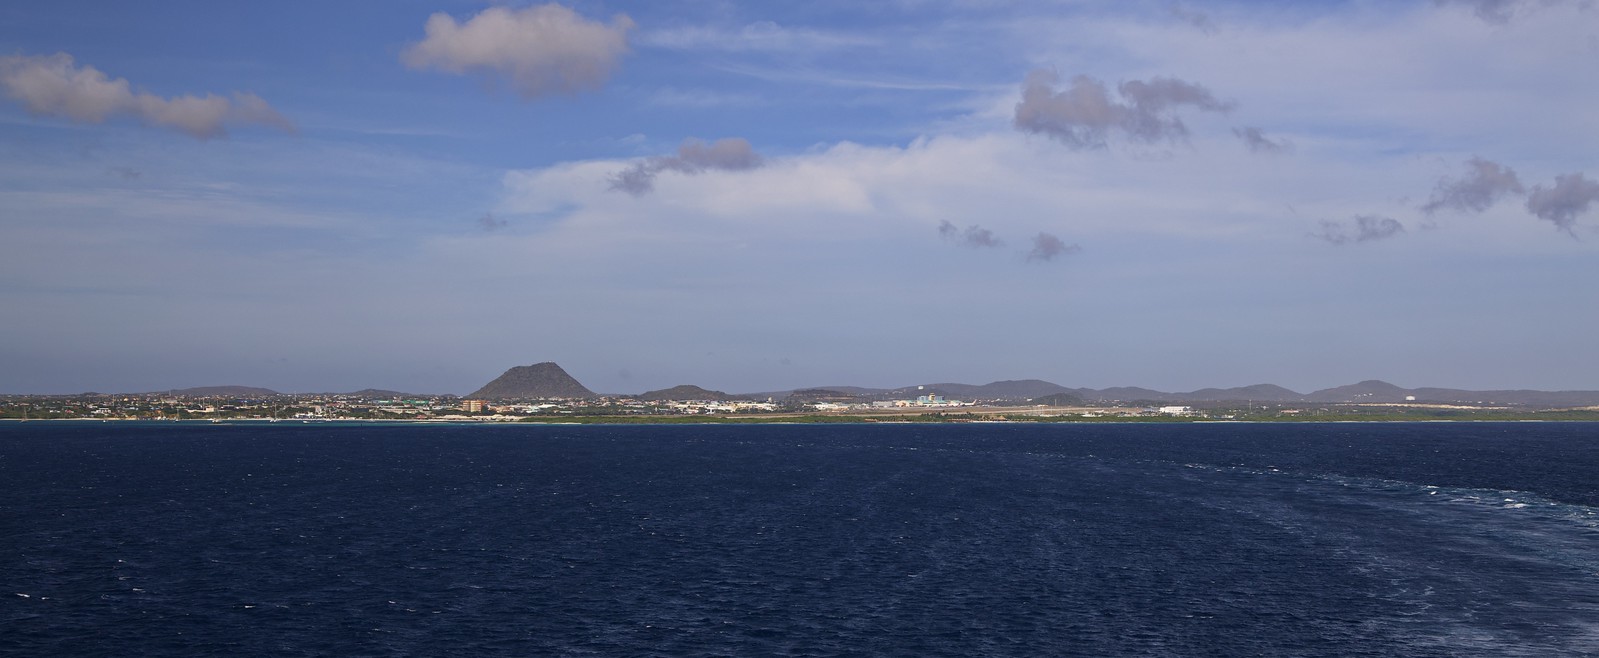 Panorama of coastal Oranjestad from the sea as the ship departs the harbour